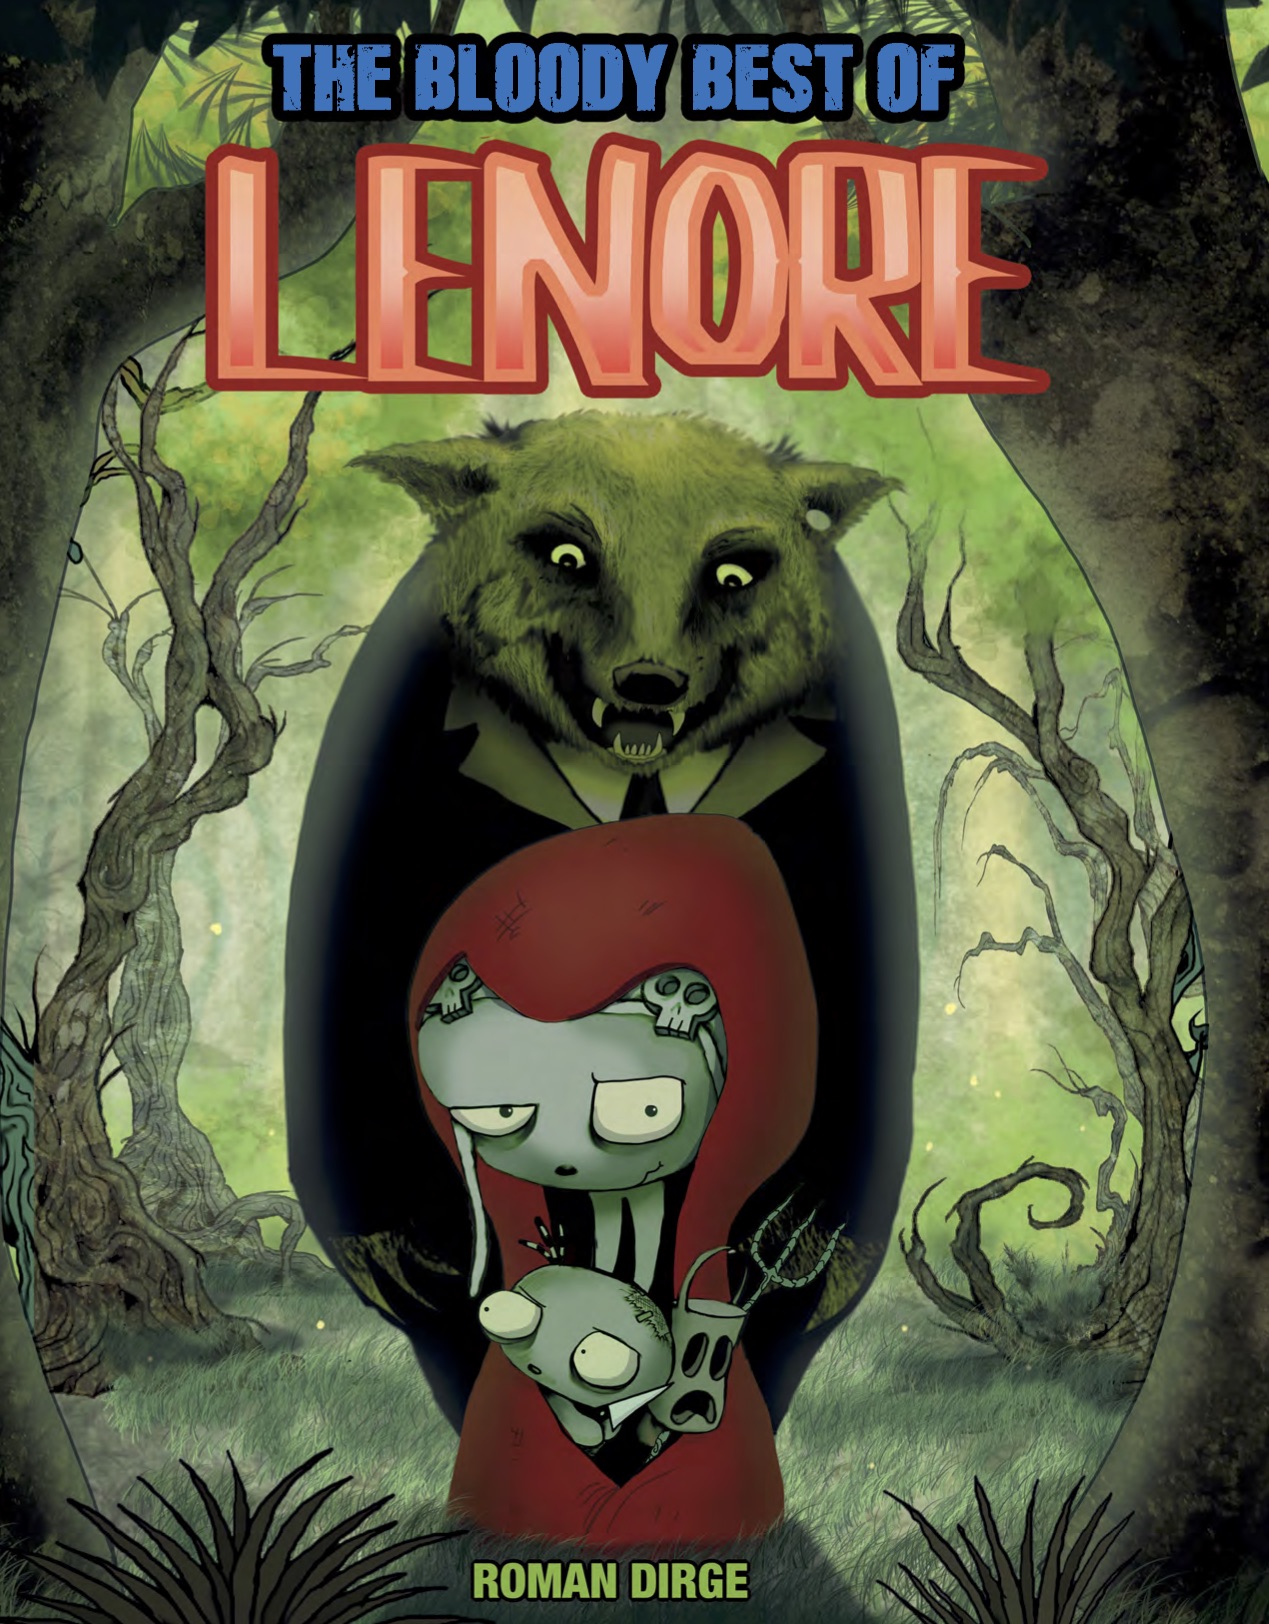 The_Bloody_Best_of_Lenore_Cover.jpg